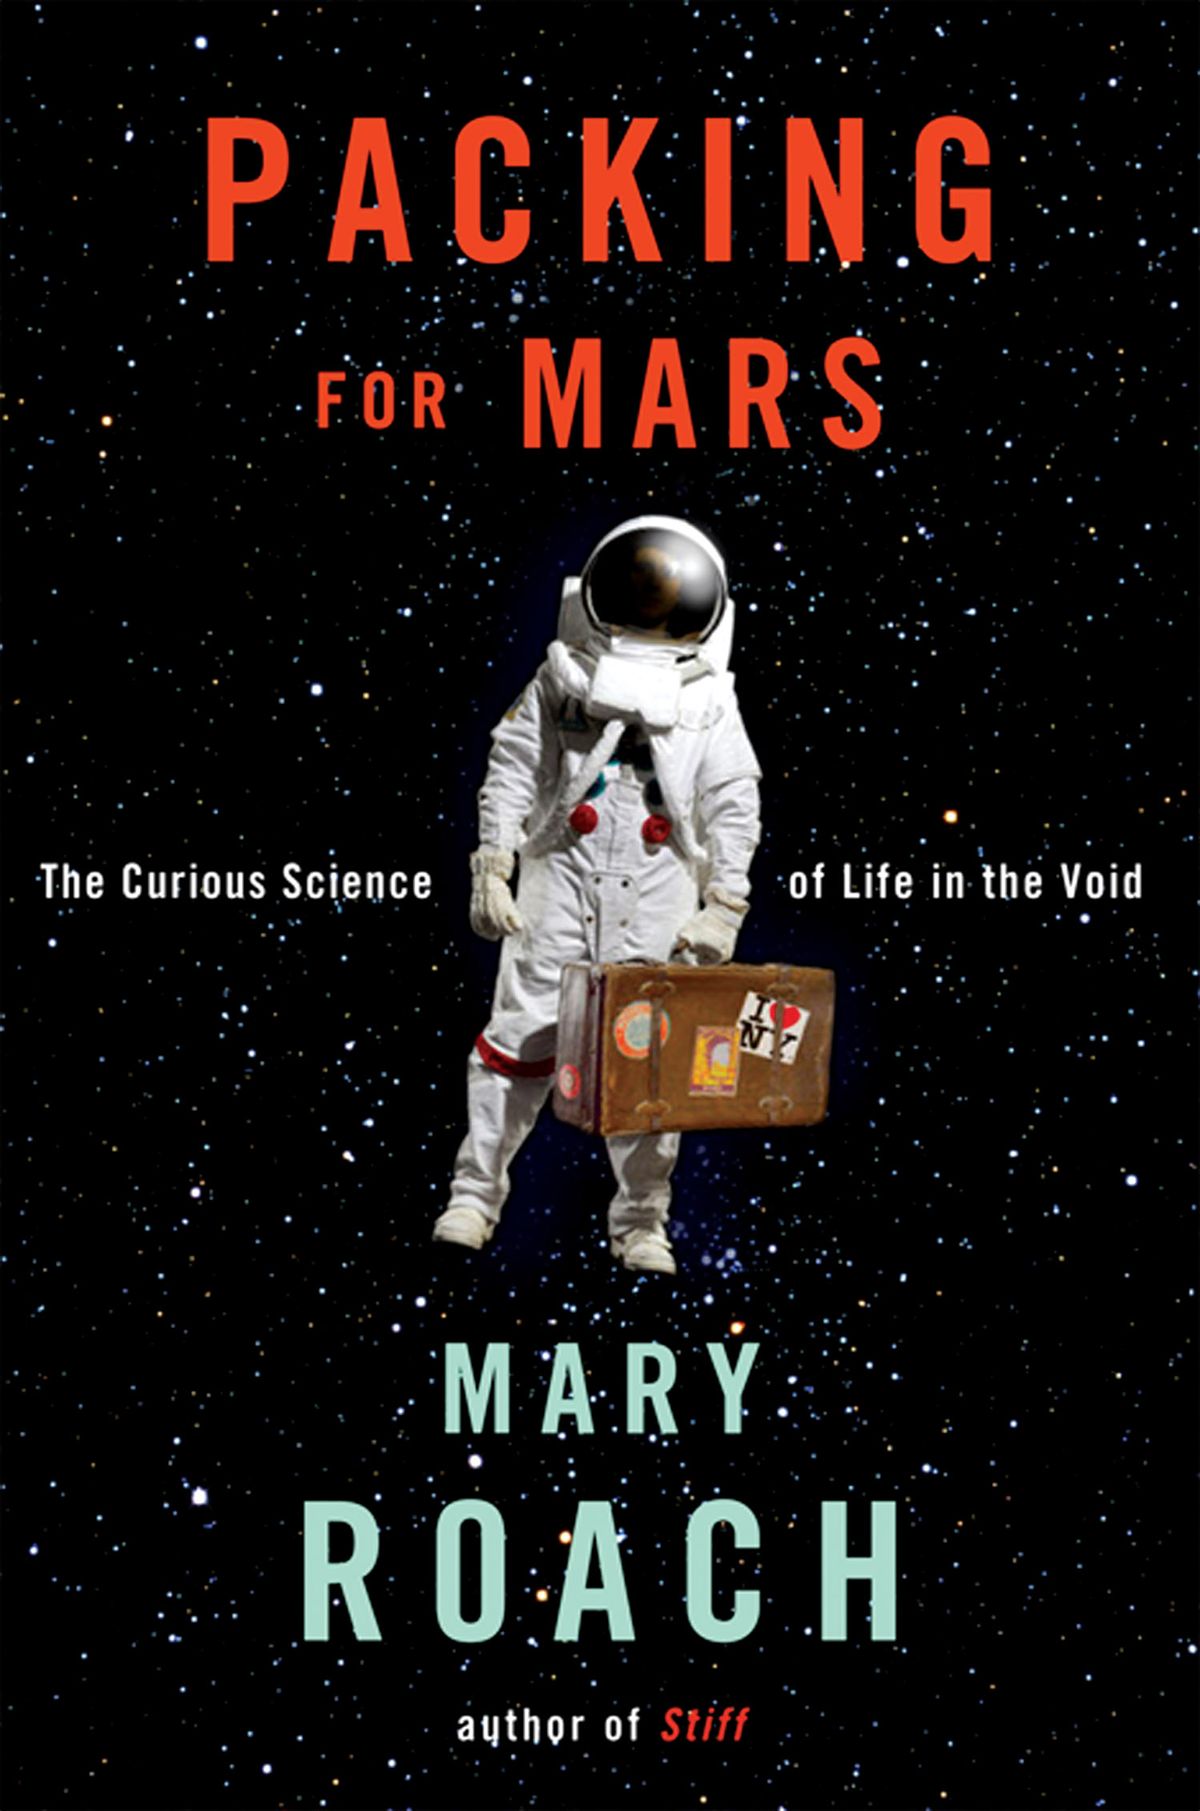 "Packing for Mars" by Mary Roach